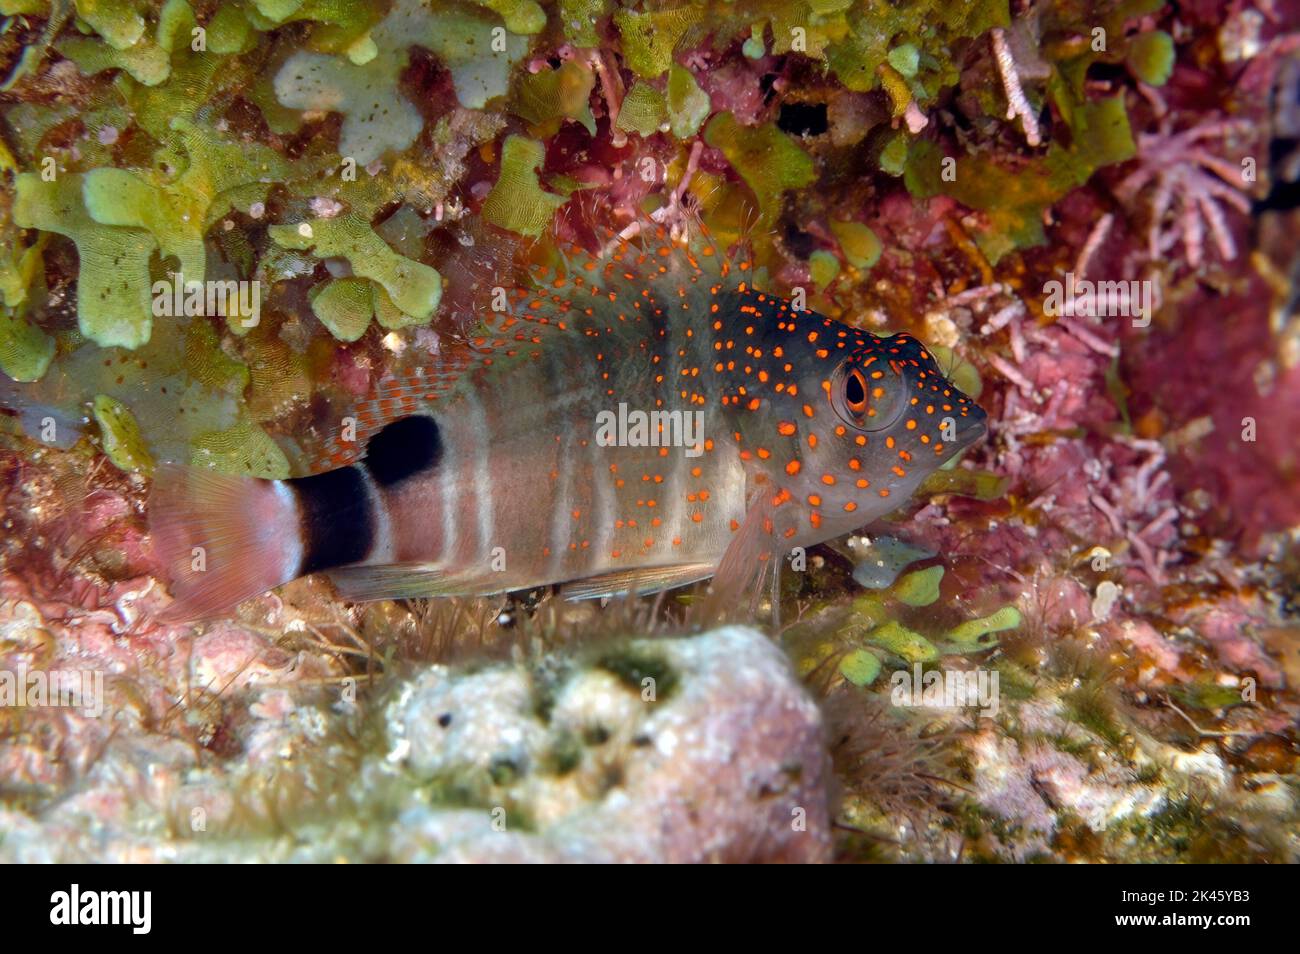 A razorfish rests on a colorful reef of hard coral and vegetation in Roatan Honduras. waiting to ambush a small crab for food. Stock Photo